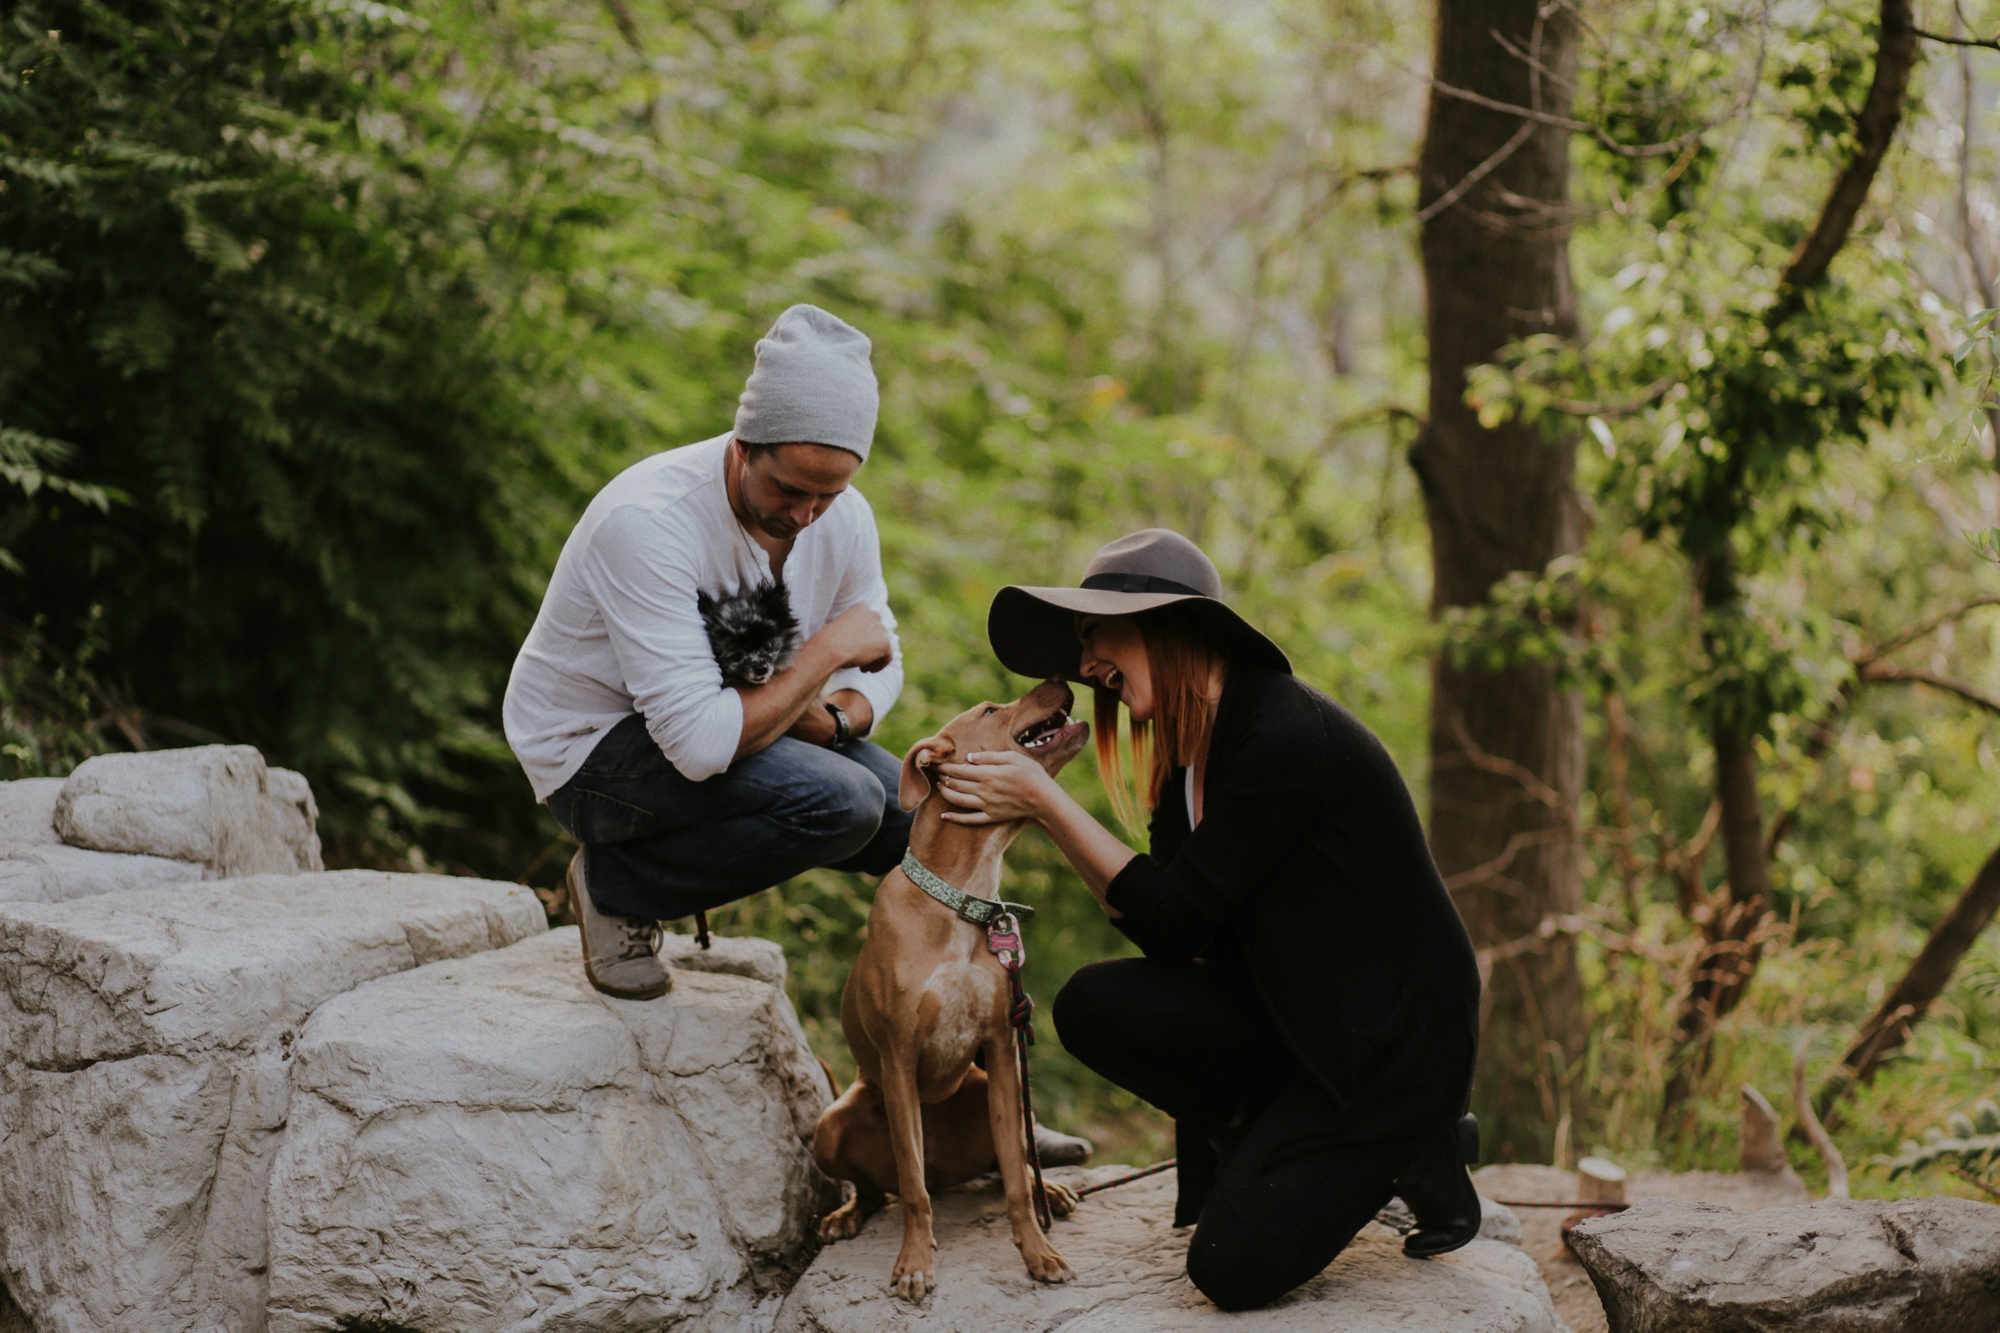  Kymbrye and Chris brought their pups, Myridian and Bandit along for their shoot and they are seriously the sweetest model dogs ever! They all looked so picture perfect together for some insanely beautiful family photos at Carlitos Springs in Cedar C